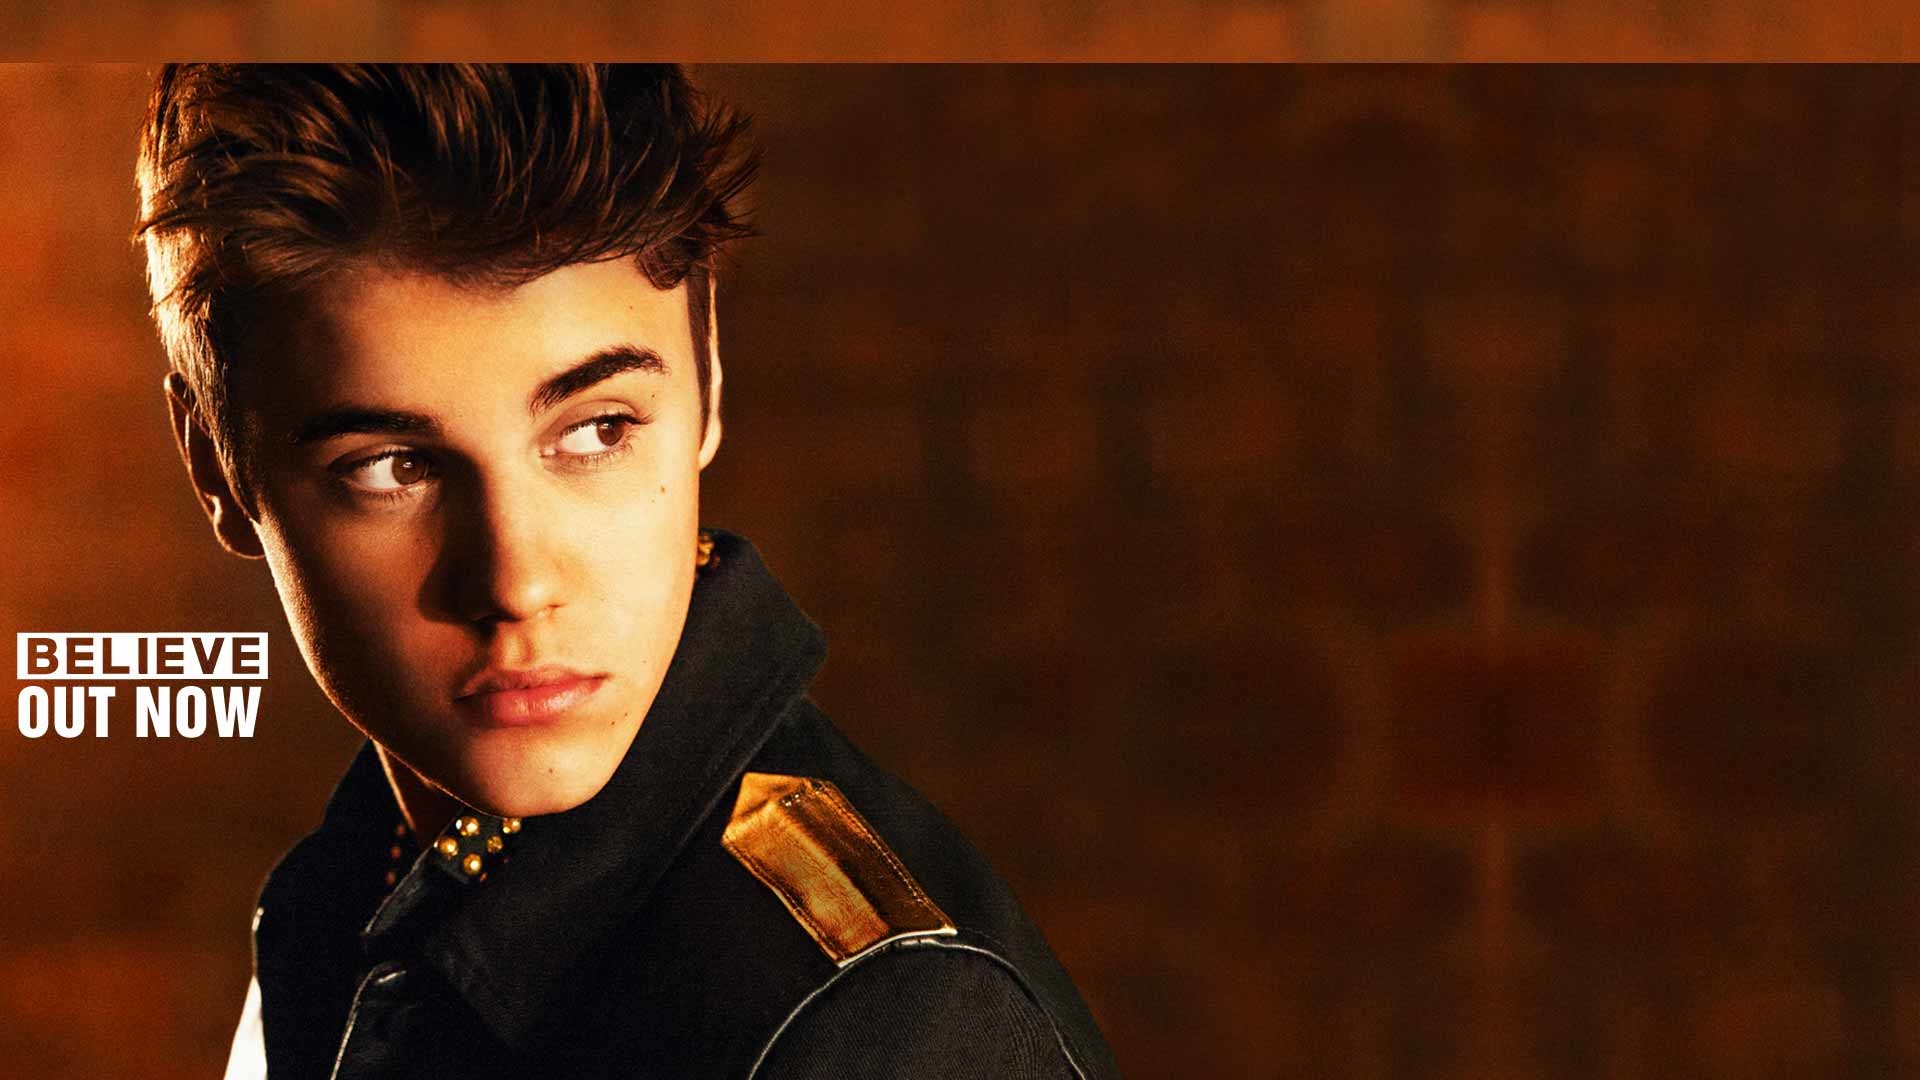 1920x1080 ... Top Canadian Singer Justin Bieber Hd Pictures and Images ...